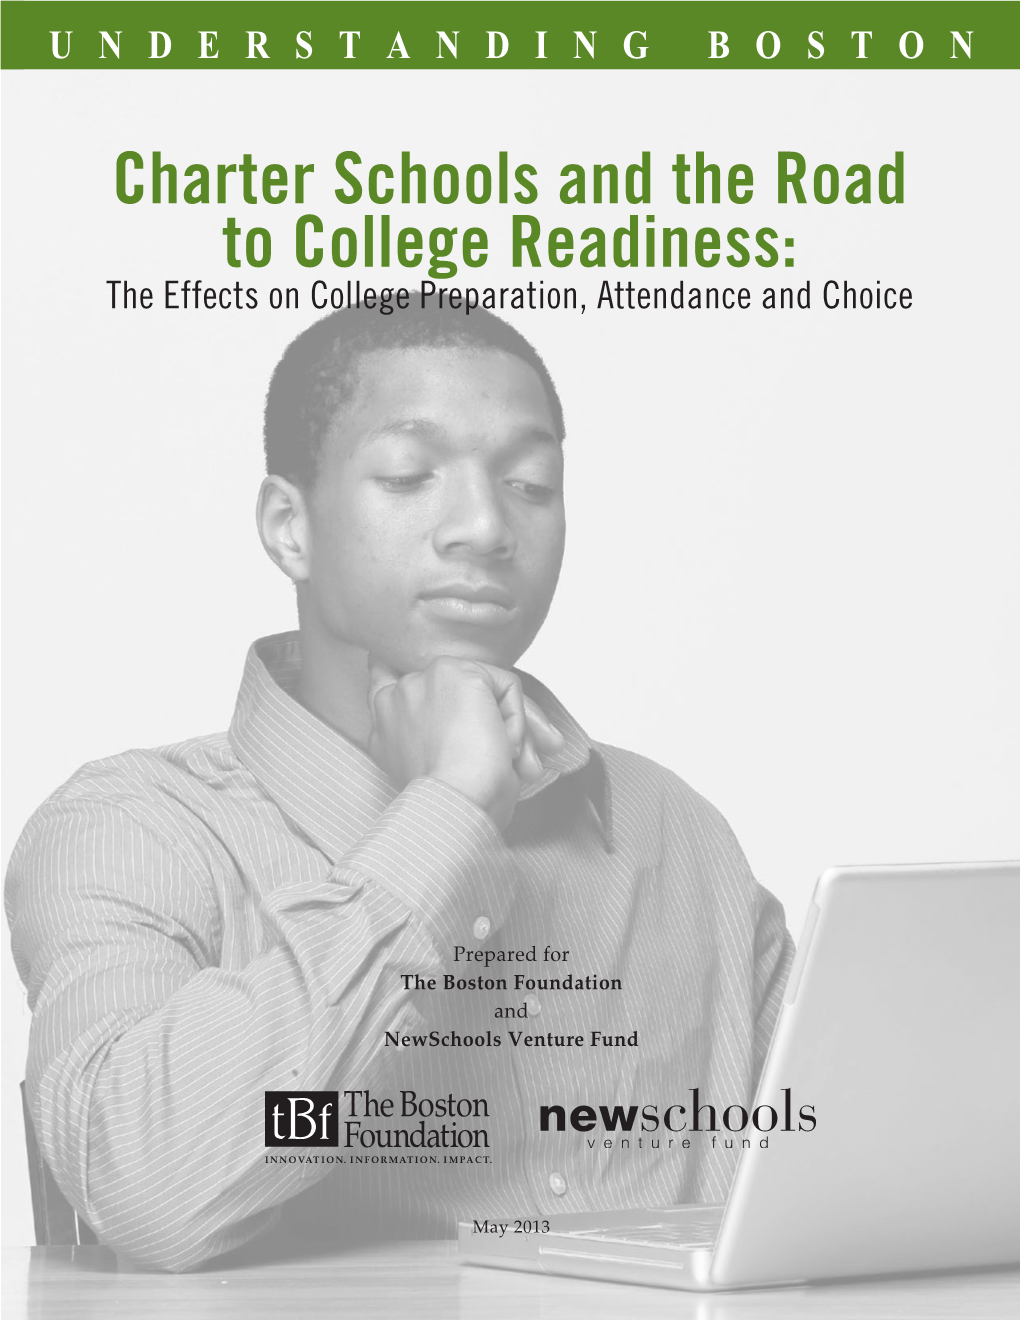 Charter Schools and the Road to College Readiness: the Effects on College Preparation, Attendance and Choice